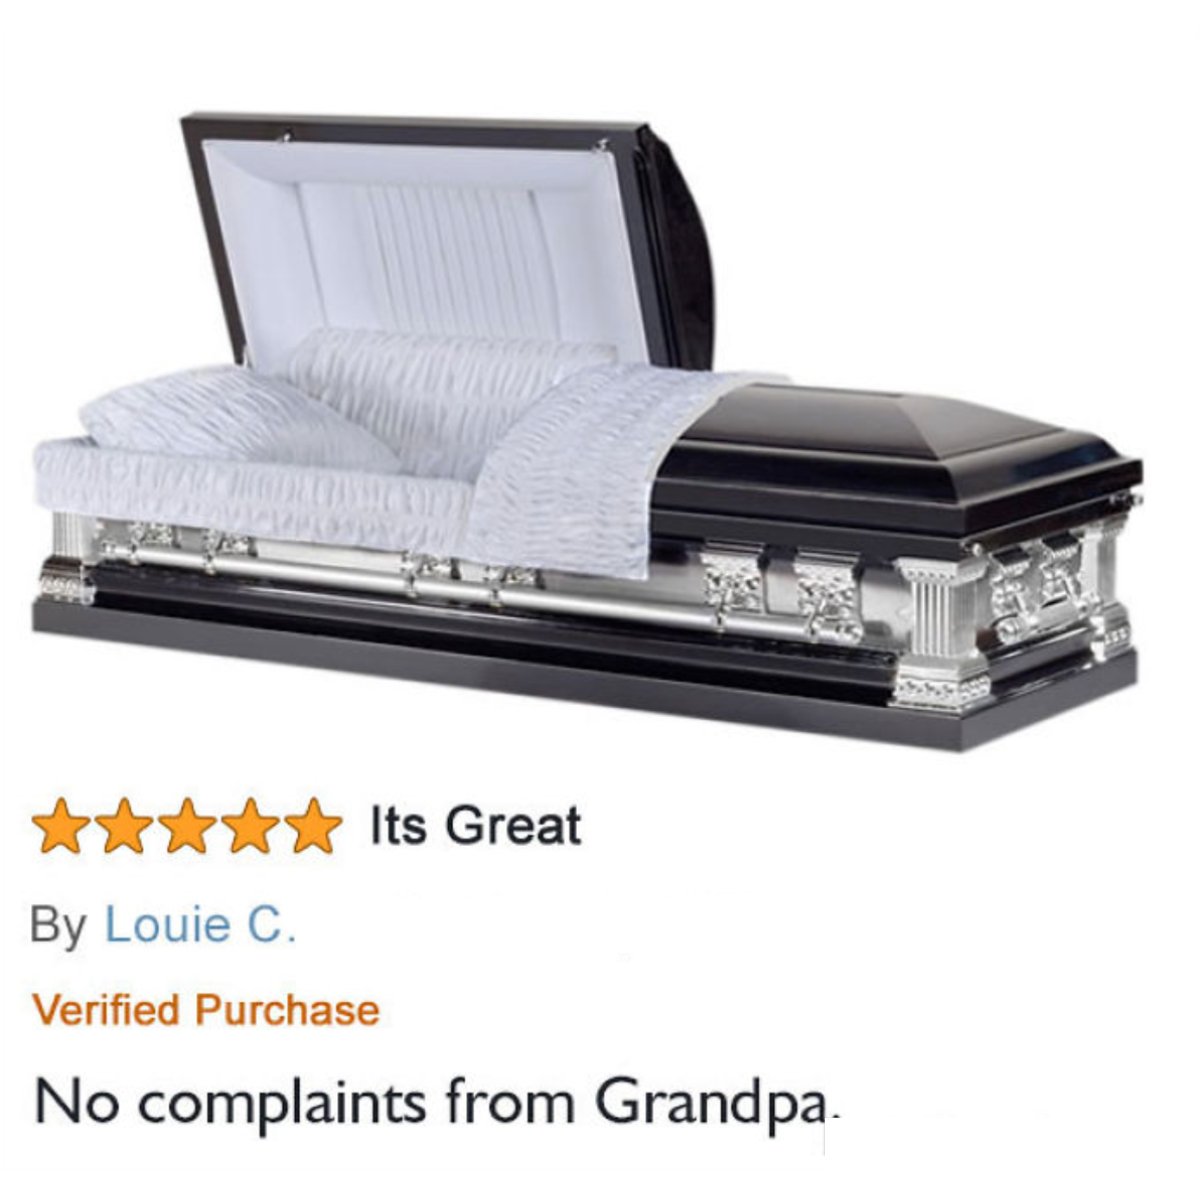 Welcome to another uproariously funny episode of our #FridayFunny series! This week, we're diving into the extraordinary world of...coffins? 💀😄 Get ready for some dark humor: 'It's great. No complaints from Grandpa.' 😂😅 Who knew coffins could receive such rave reviews?